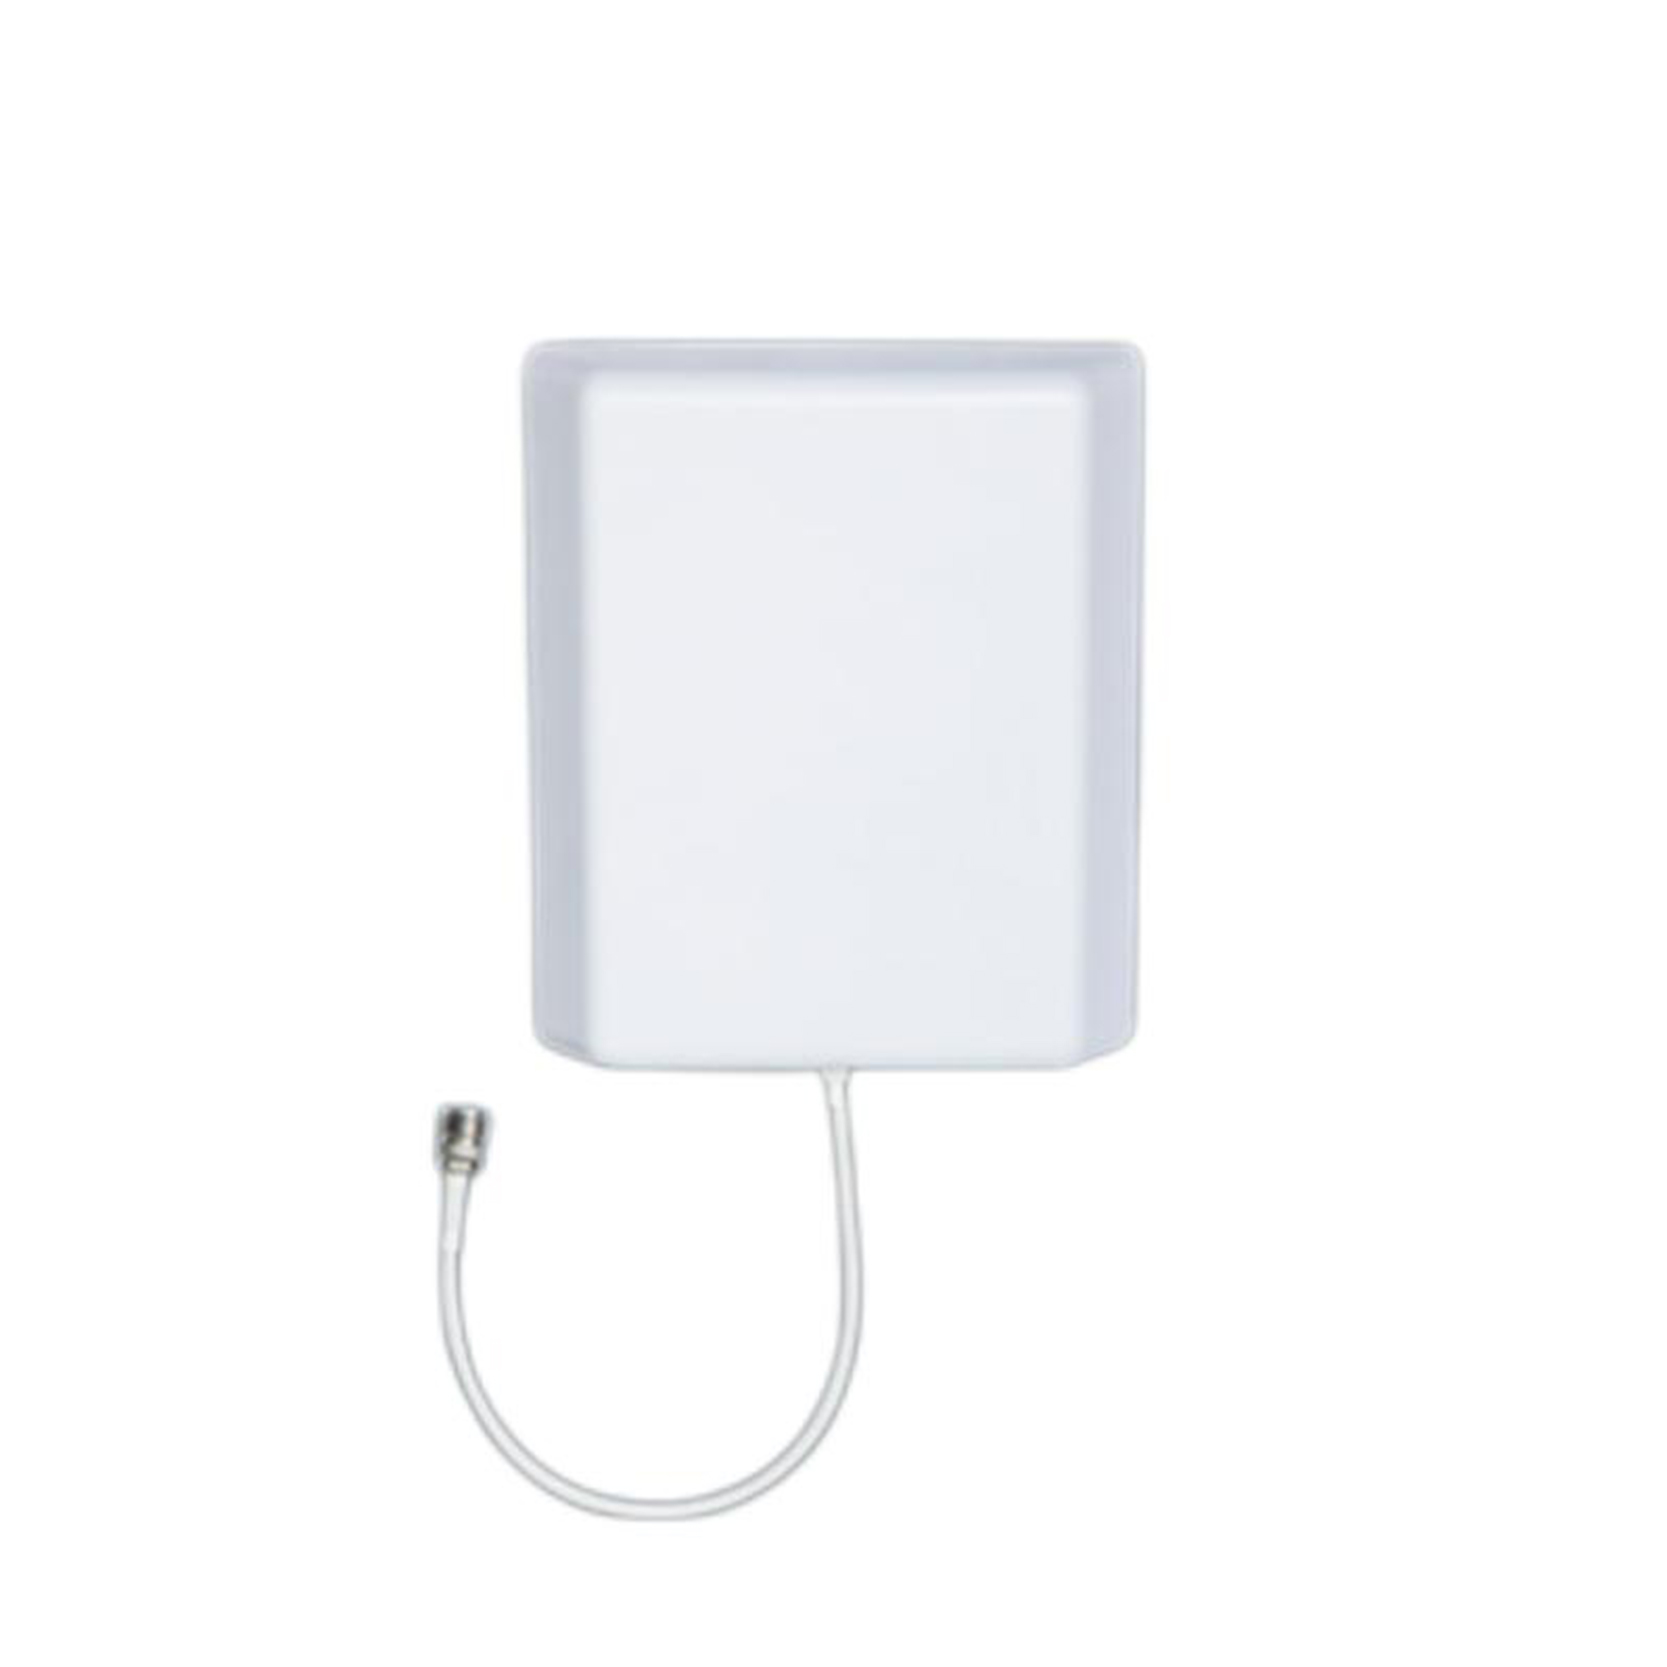 High Quality 698-960MHz 1710-2700MHz 6/7dBi Indoor Panel Antenna With N Female Connector